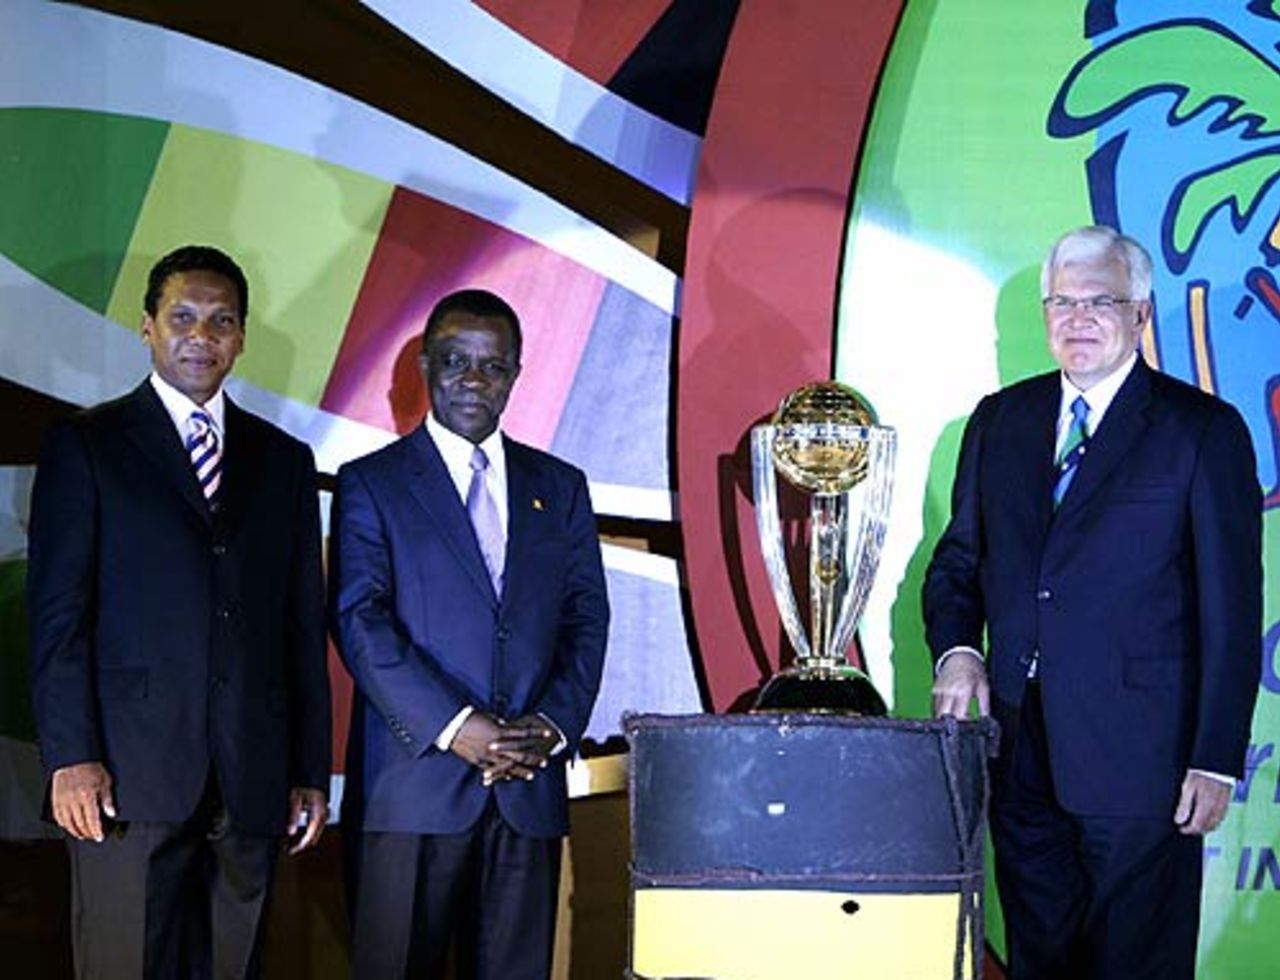 Malcolm Speed, Chris Dehring, the Cricket World Cup chief executive, and Keith Mitchell, the prime minister of Grenada, pose with the World Cup 2007 trophy , New Delhi, July 27, 2006